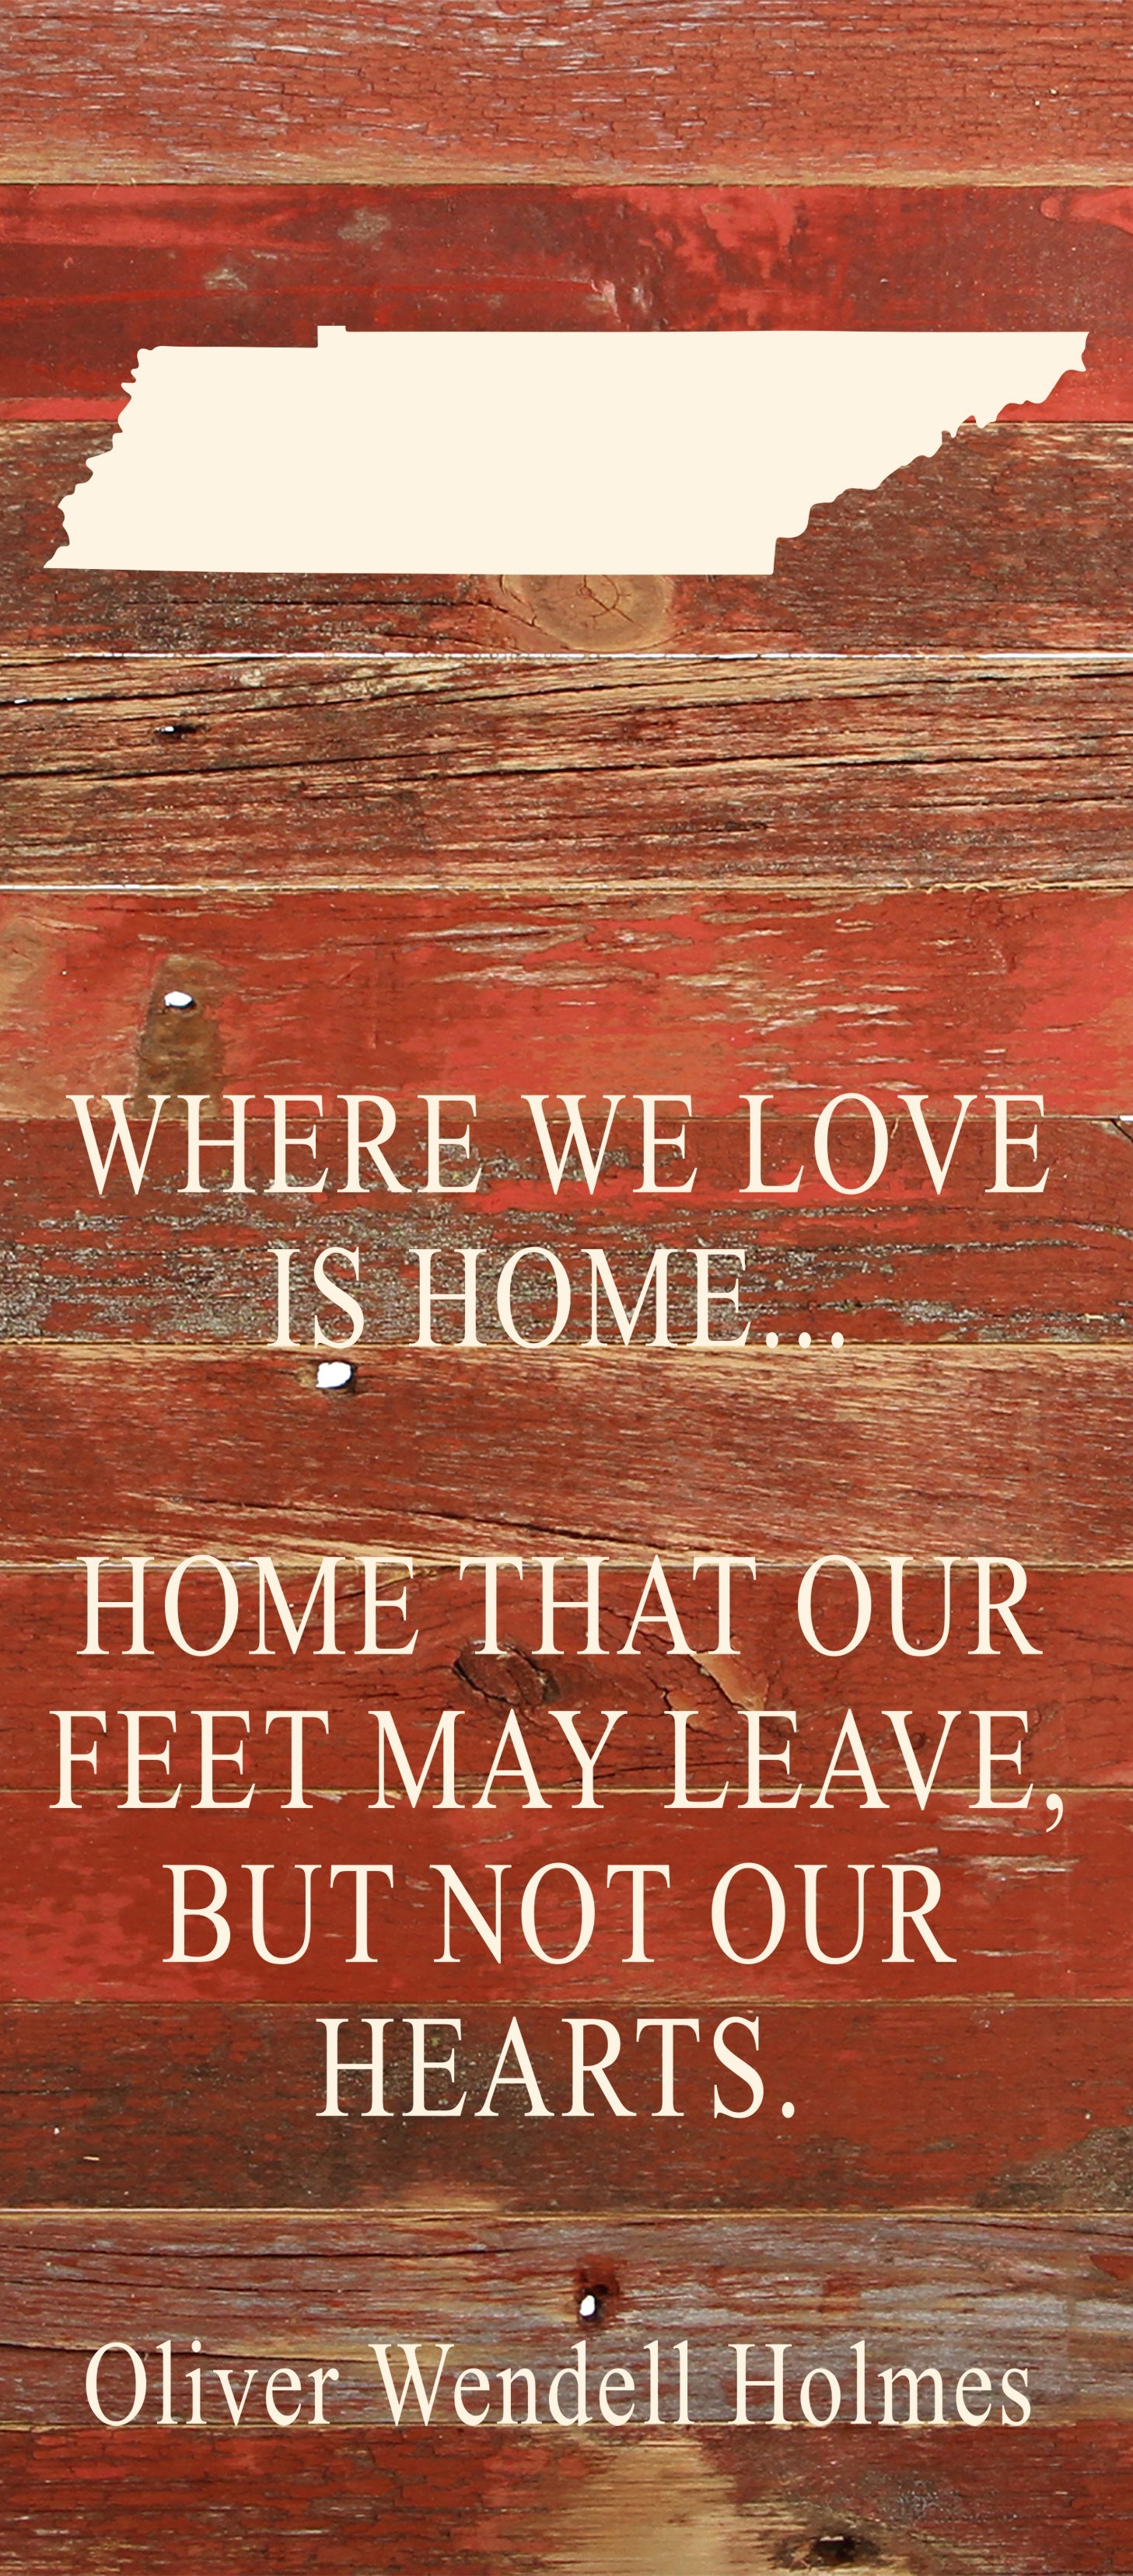 Where we love is home home that our feet may leave, but not our hearts. Oliver Wendell Holmes / 6"x14" Natural or Red Reclaimed Wood Sign